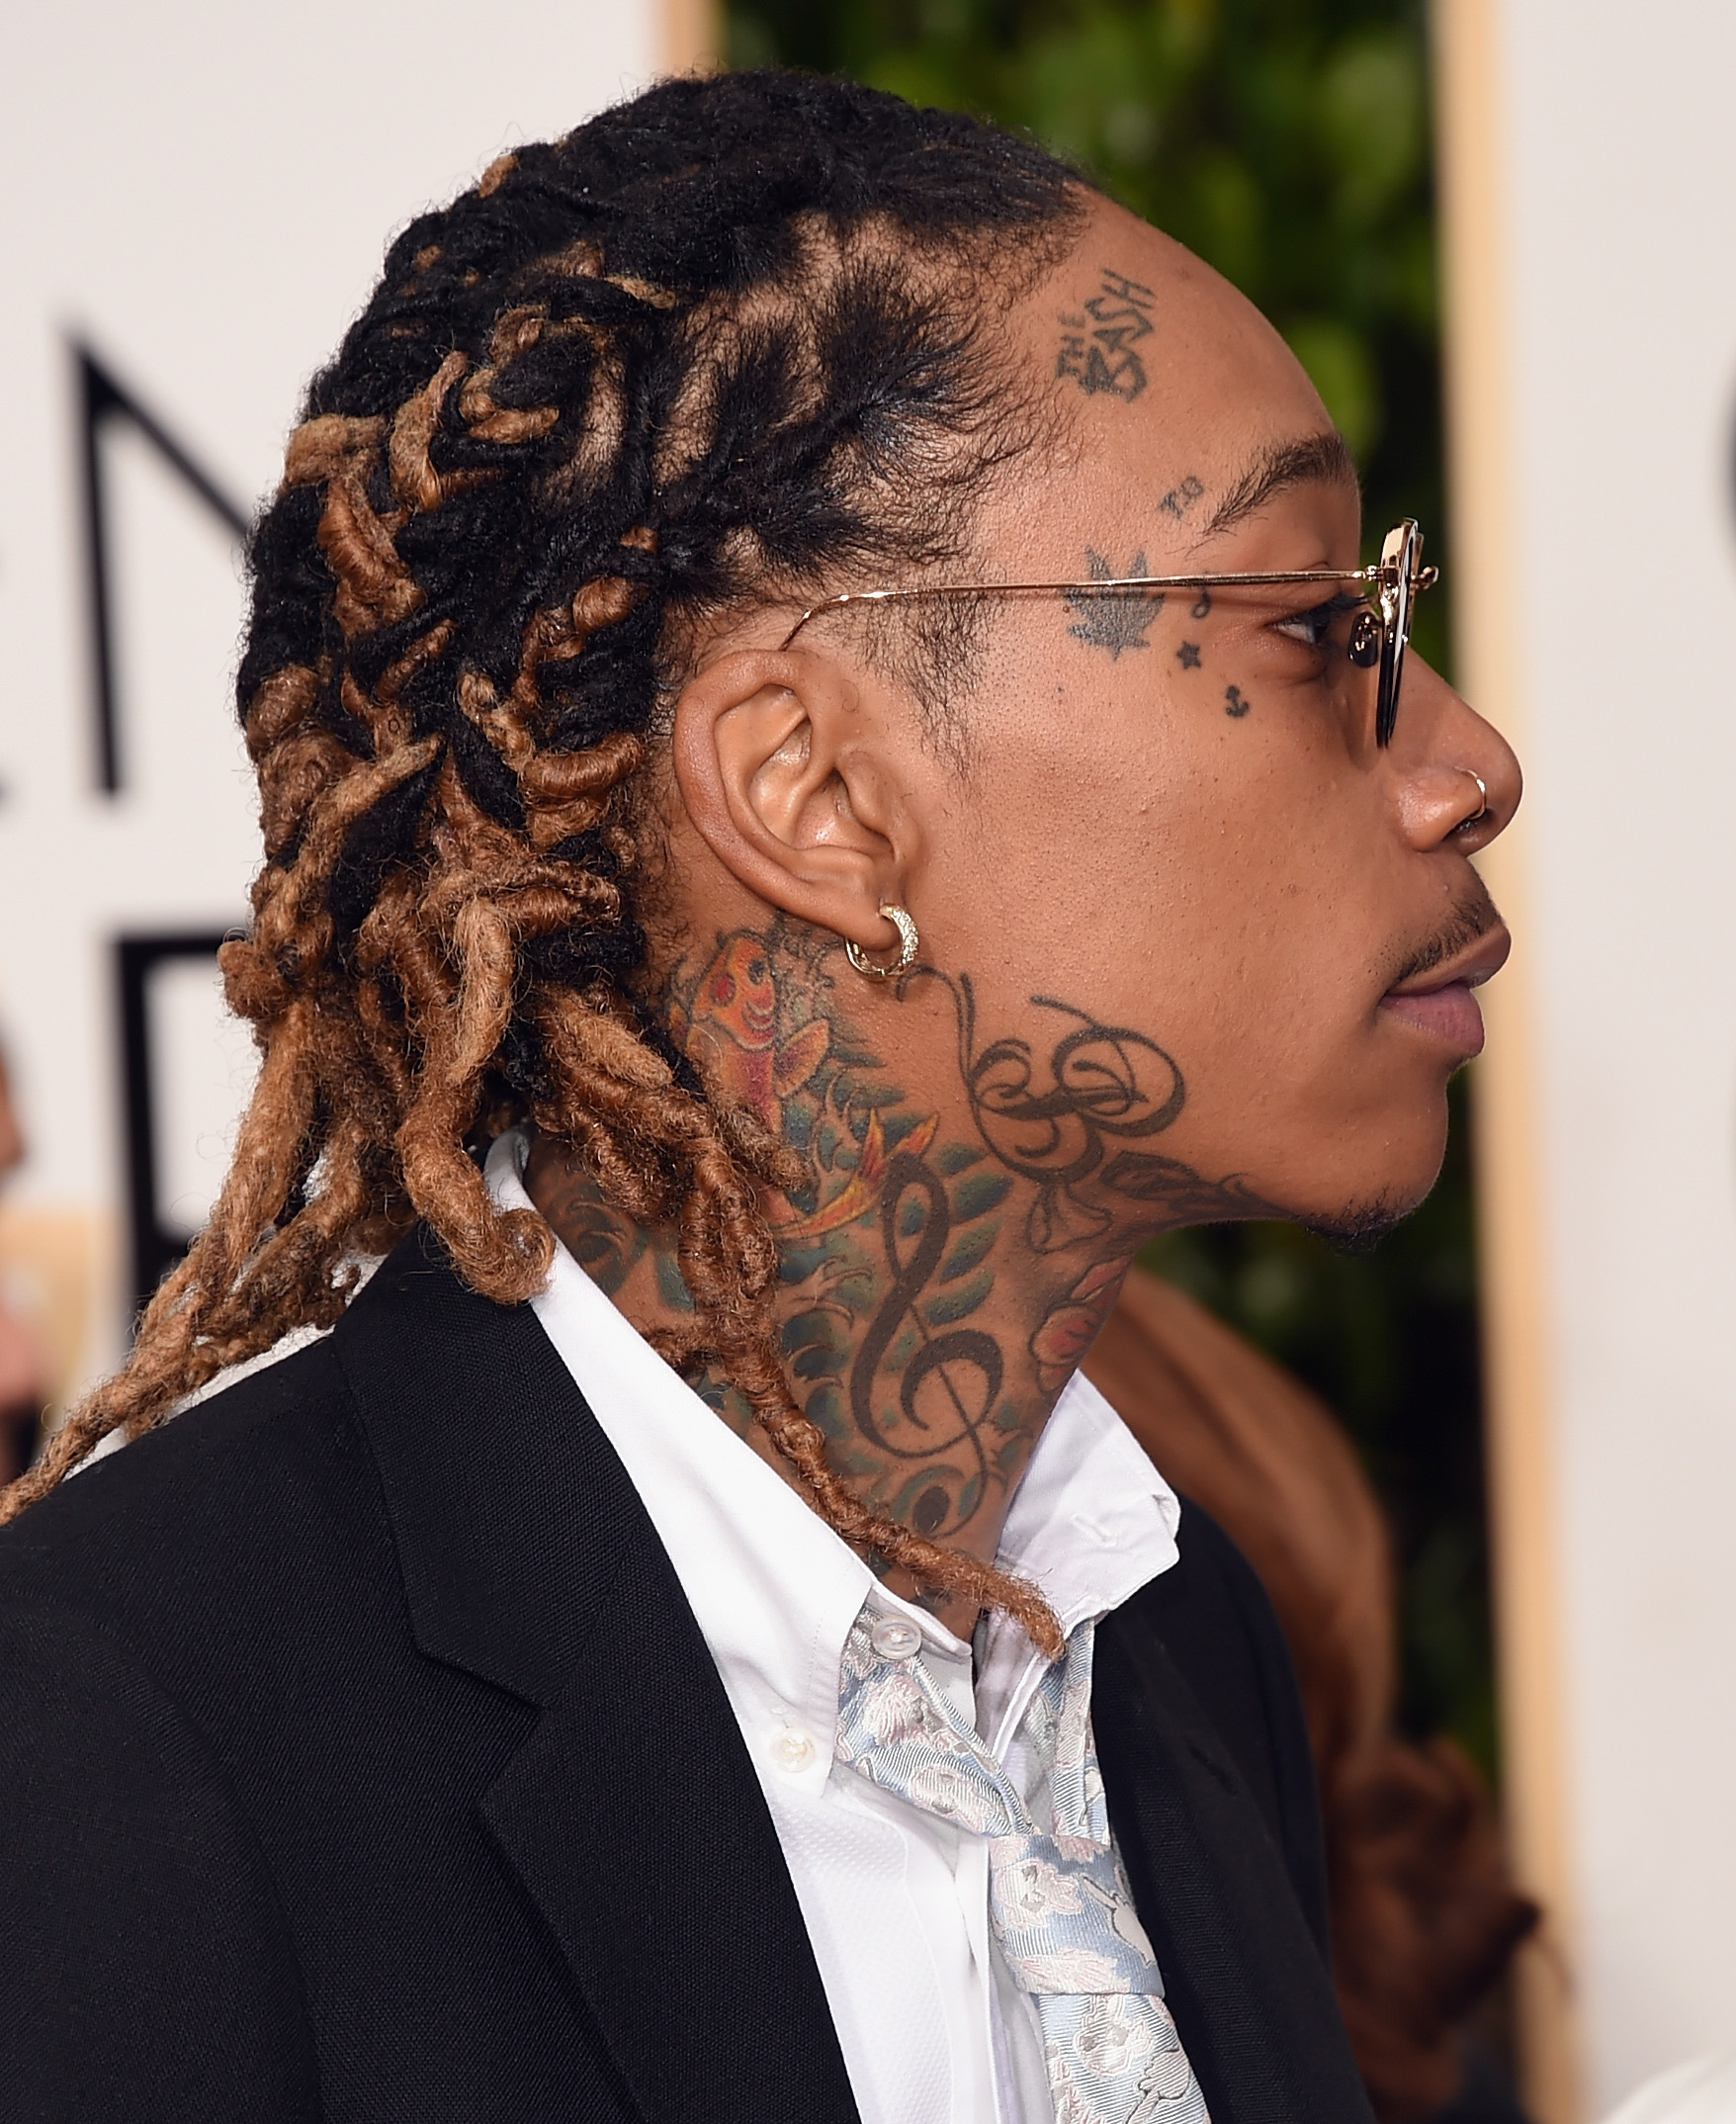 Why Wiz Khalifa's "See You Again" From 'Furious 7' Was ...